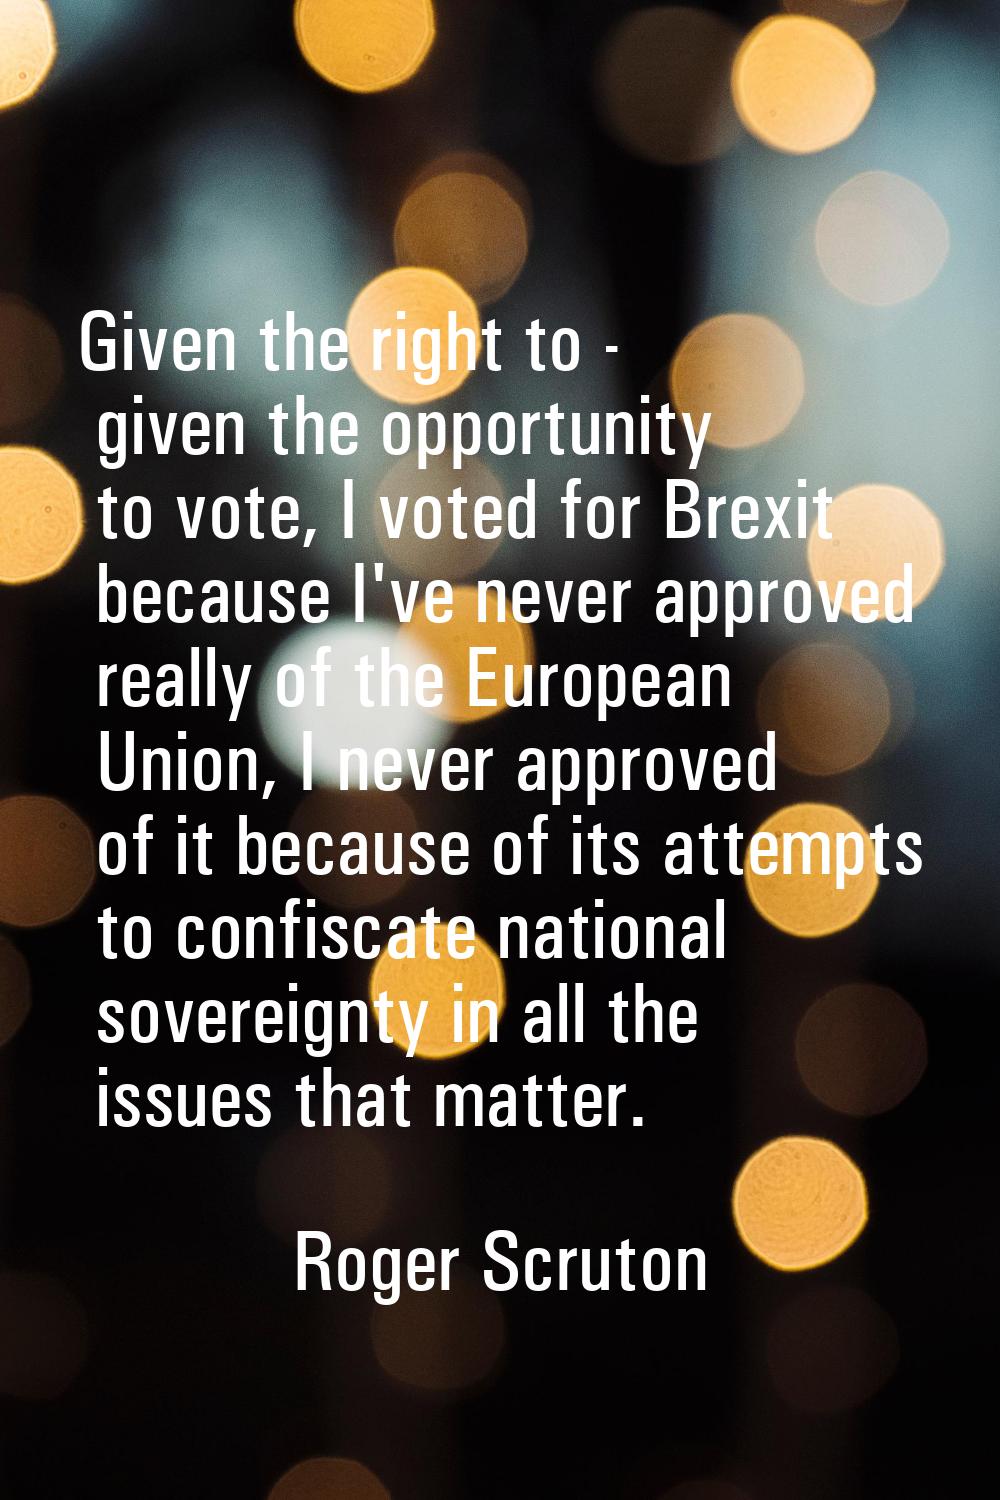 Given the right to - given the opportunity to vote, I voted for Brexit because I've never approved 